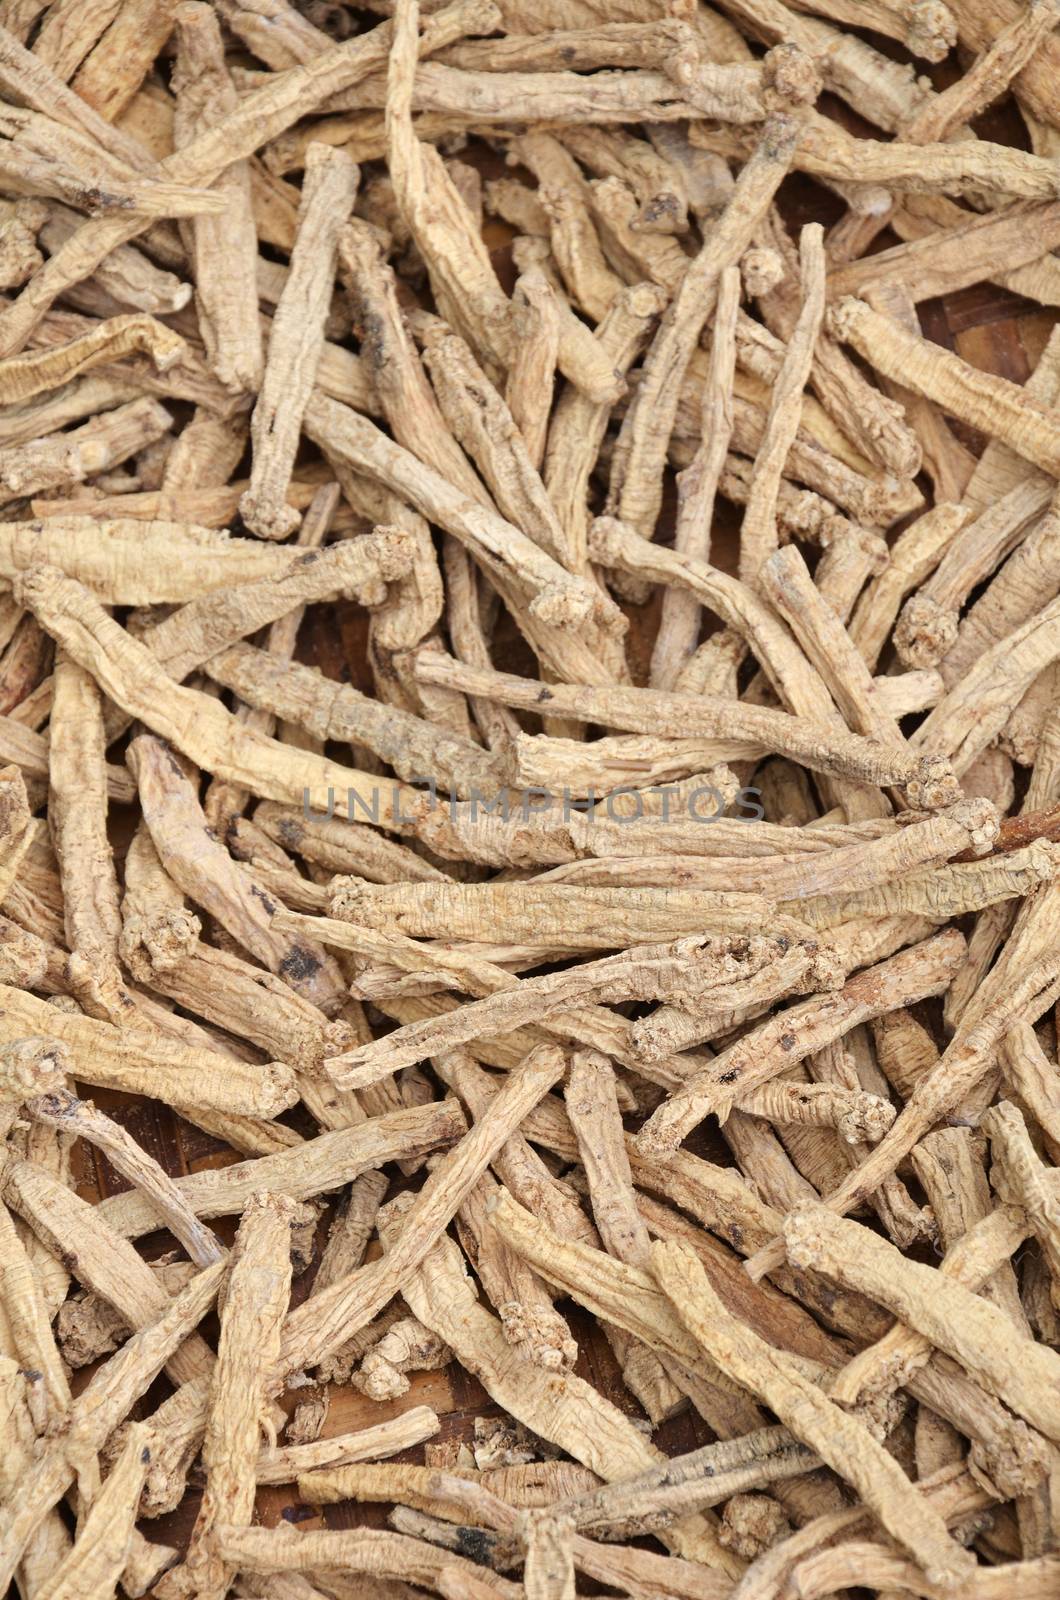 Dry Ginseng roots in Asian food market